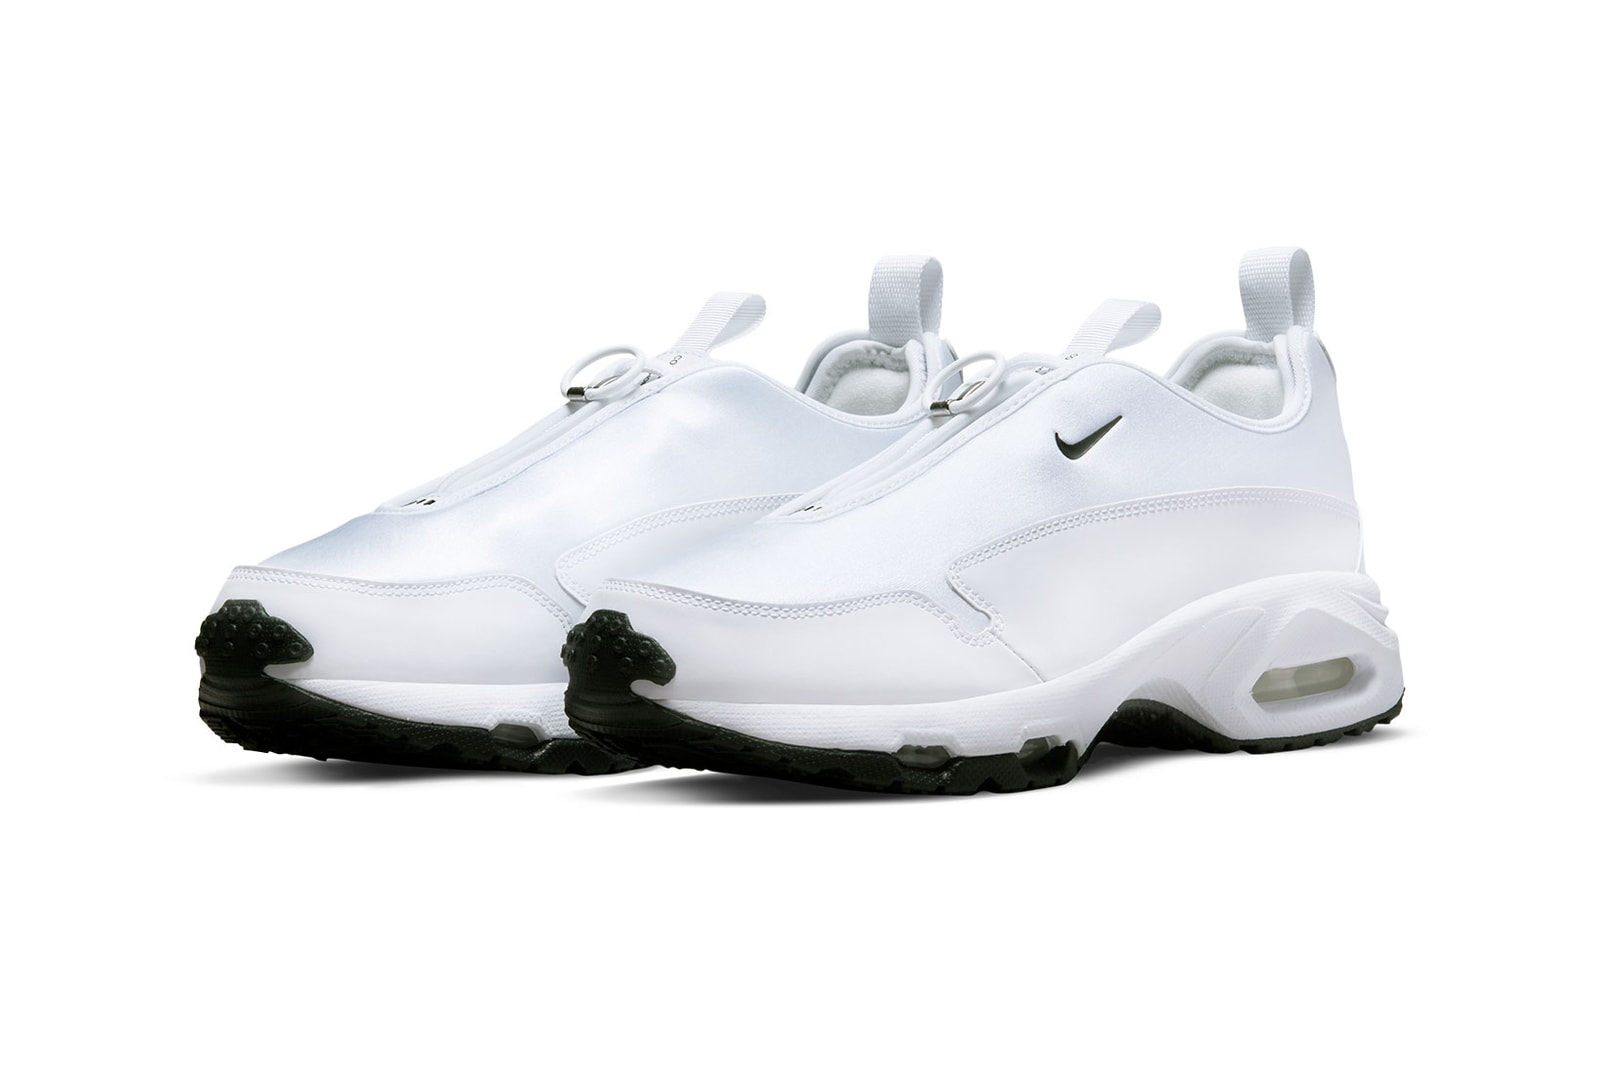 COMME des GARÇONS Nike Air Max Sunder Collaboration Release Date Where to buy